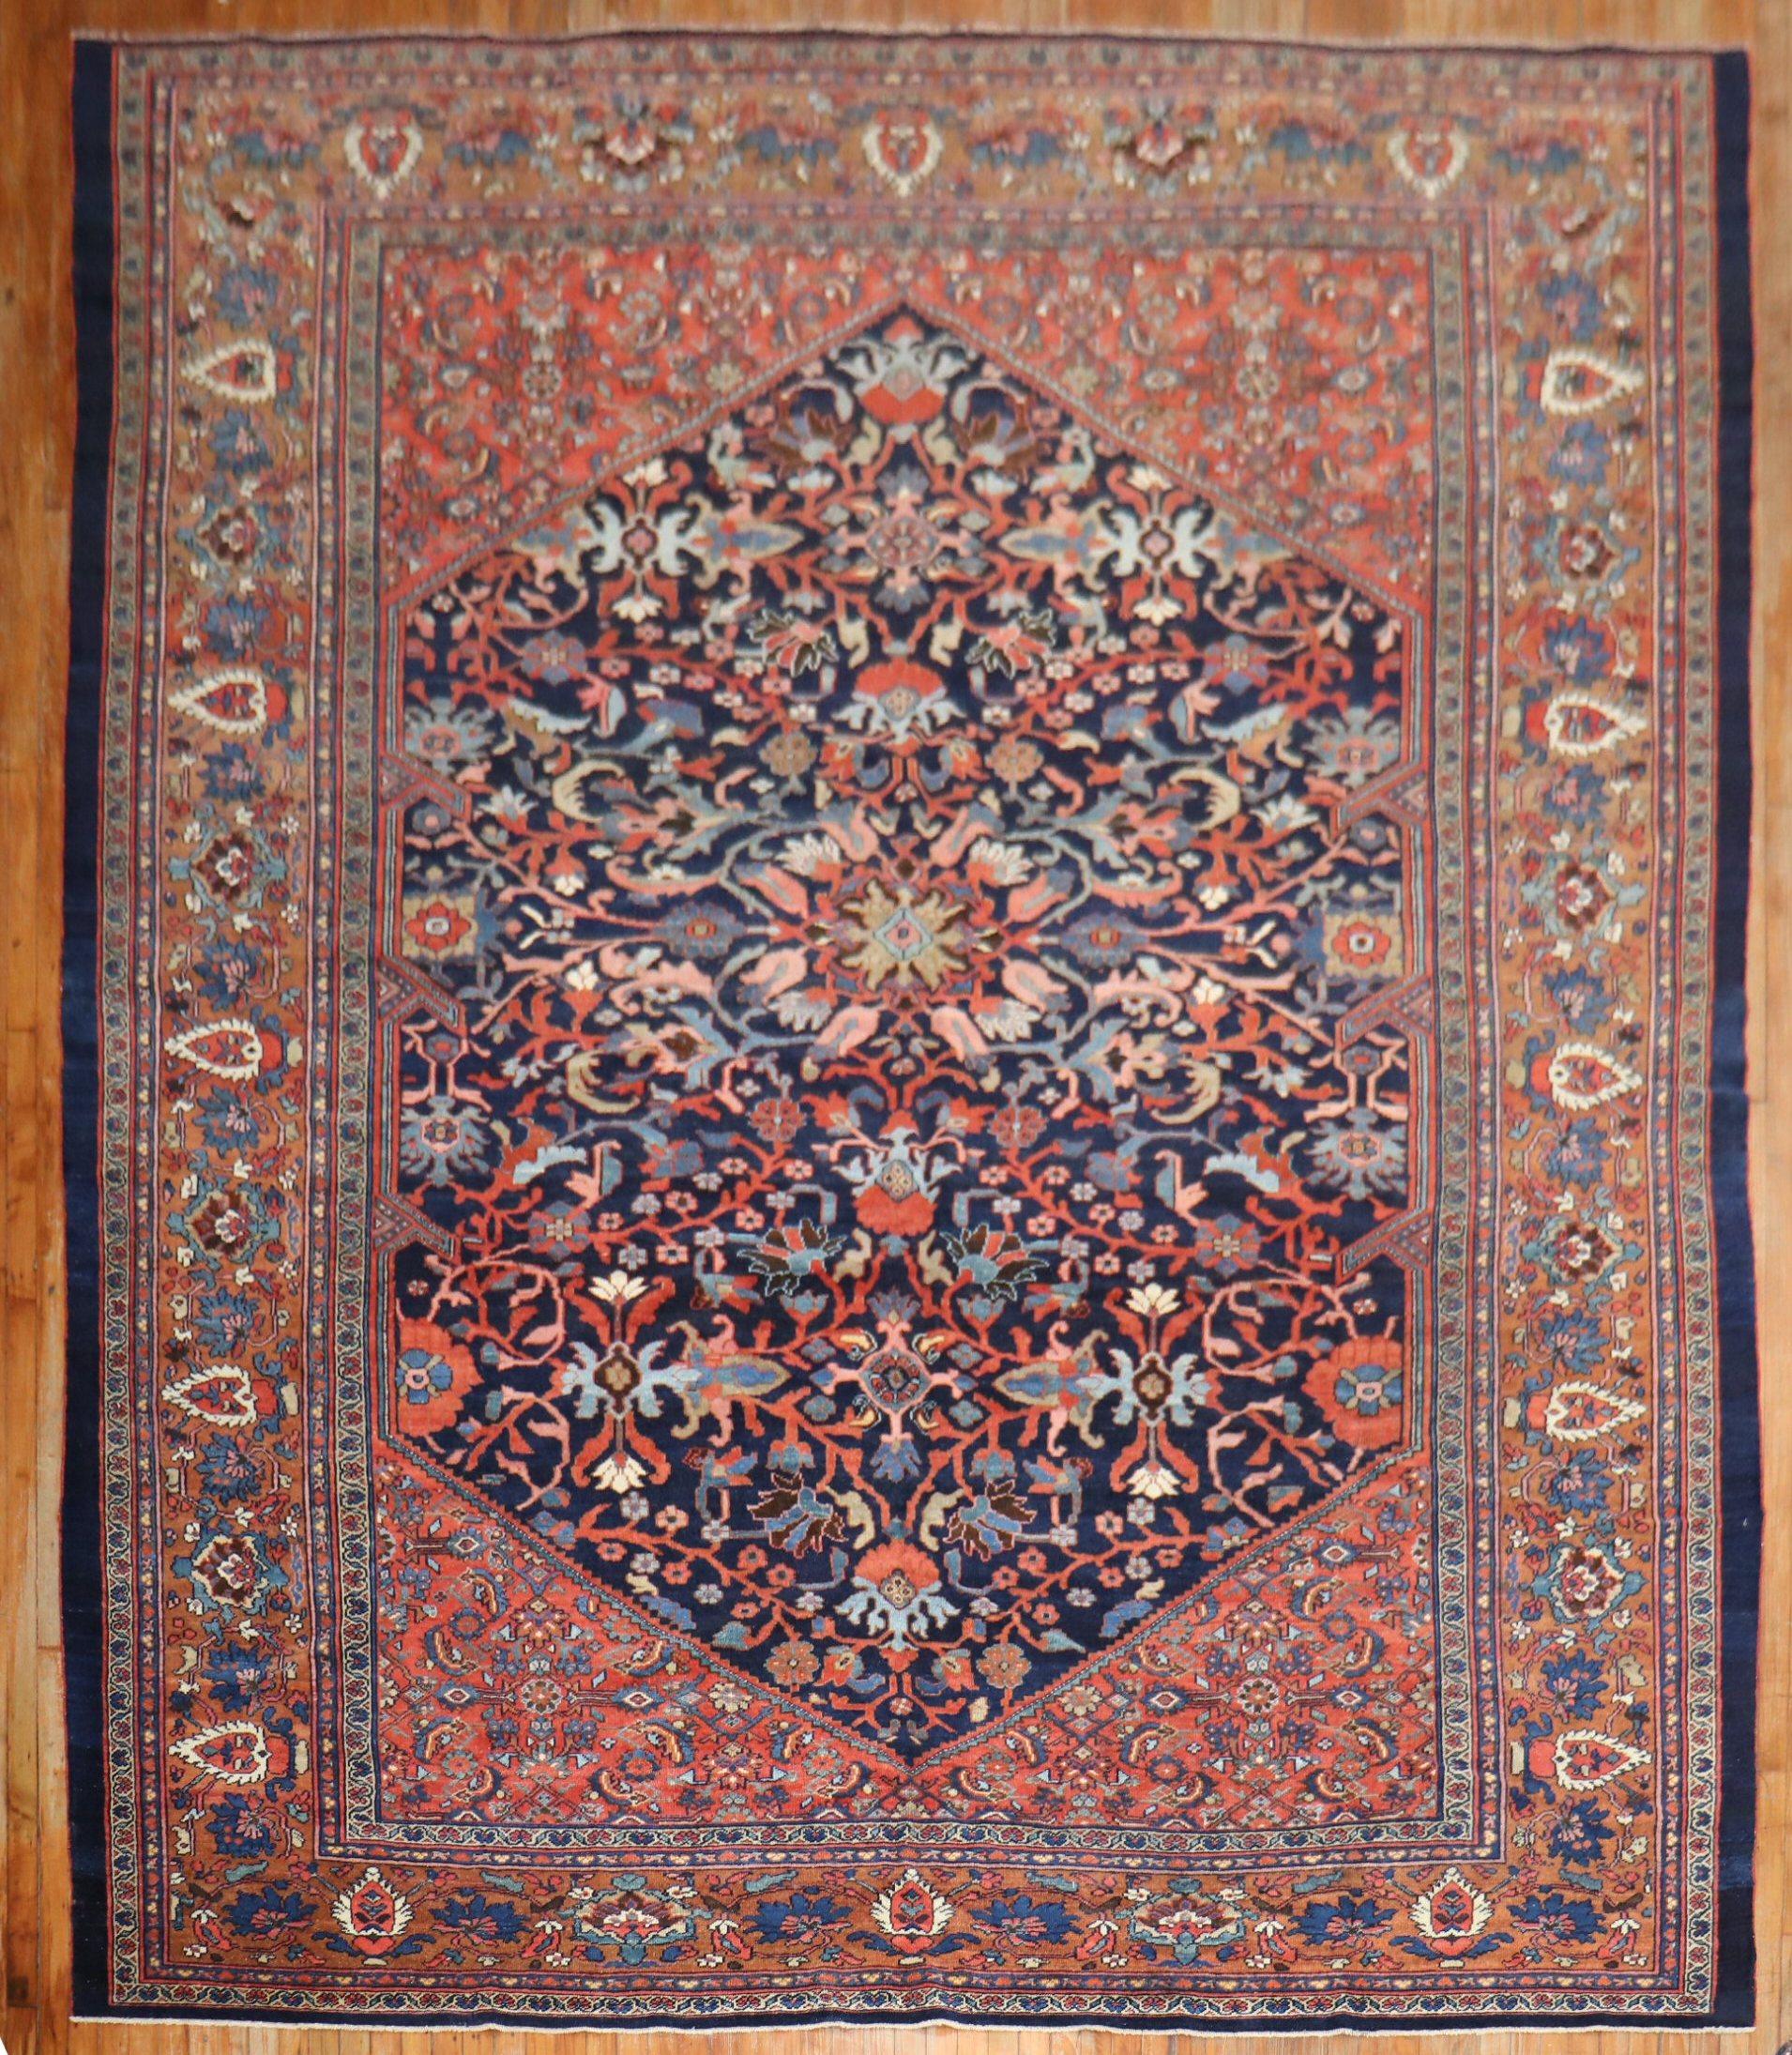 An early 20th century Persian Mahal rug.

Measures: 10'6'' x 13'3''.